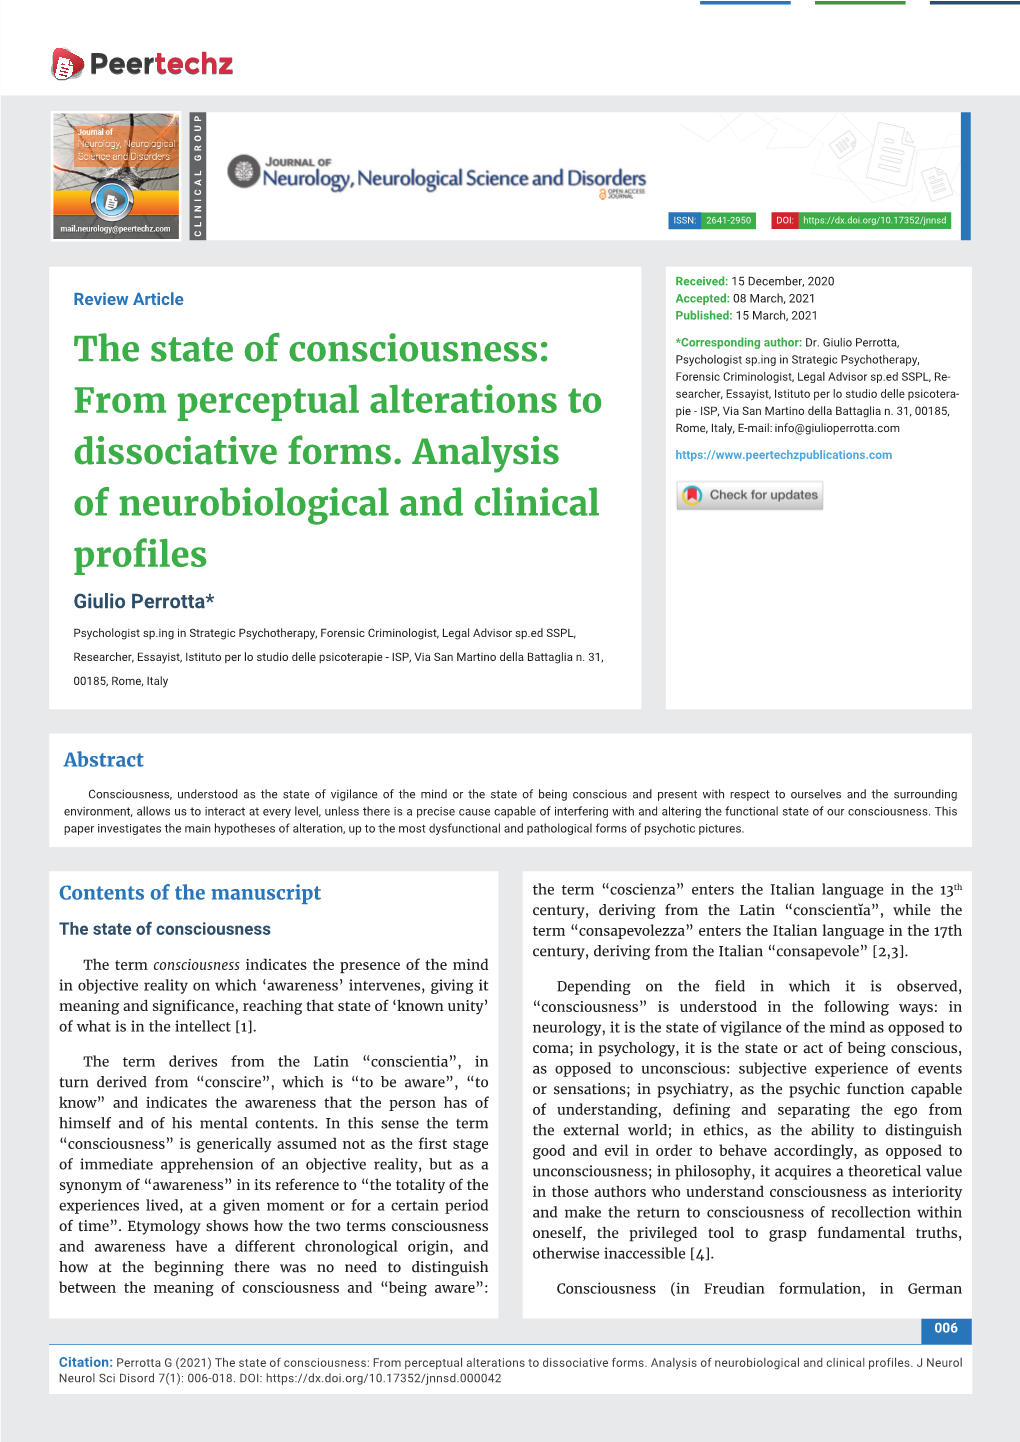 From Perceptual Alterations to Dissociative Forms. Analysis of Neurobiological and Clinical Profiles